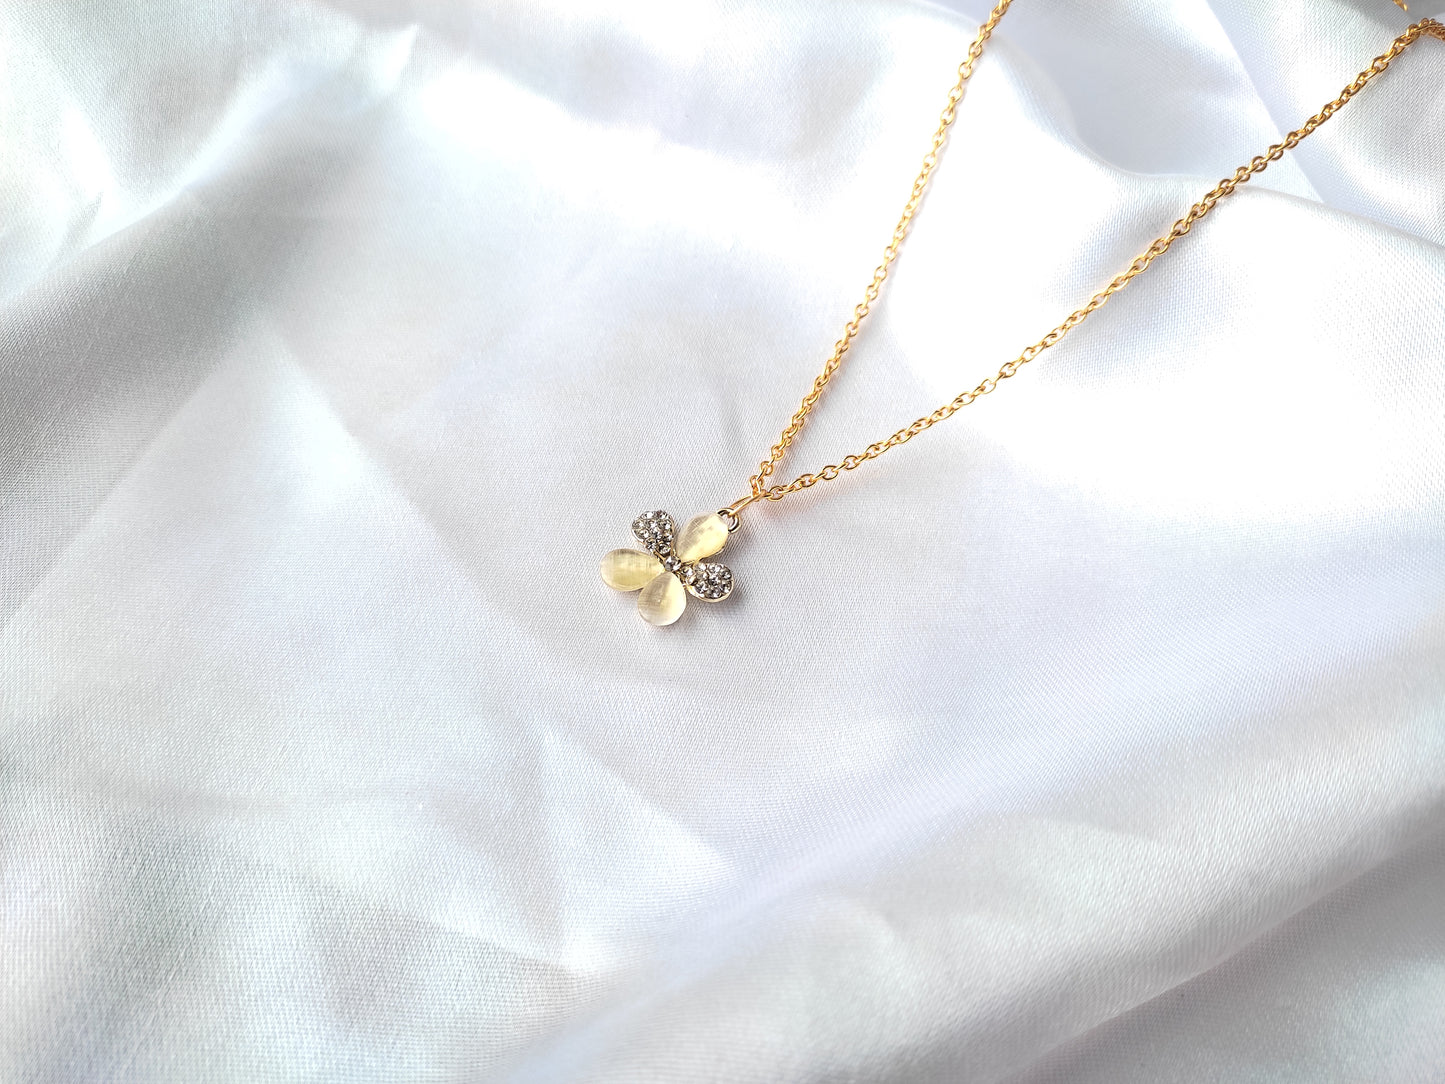 Stylish trendy Korean Gold Plated stoned Flower AD stone charm pendant necklace for women and girls